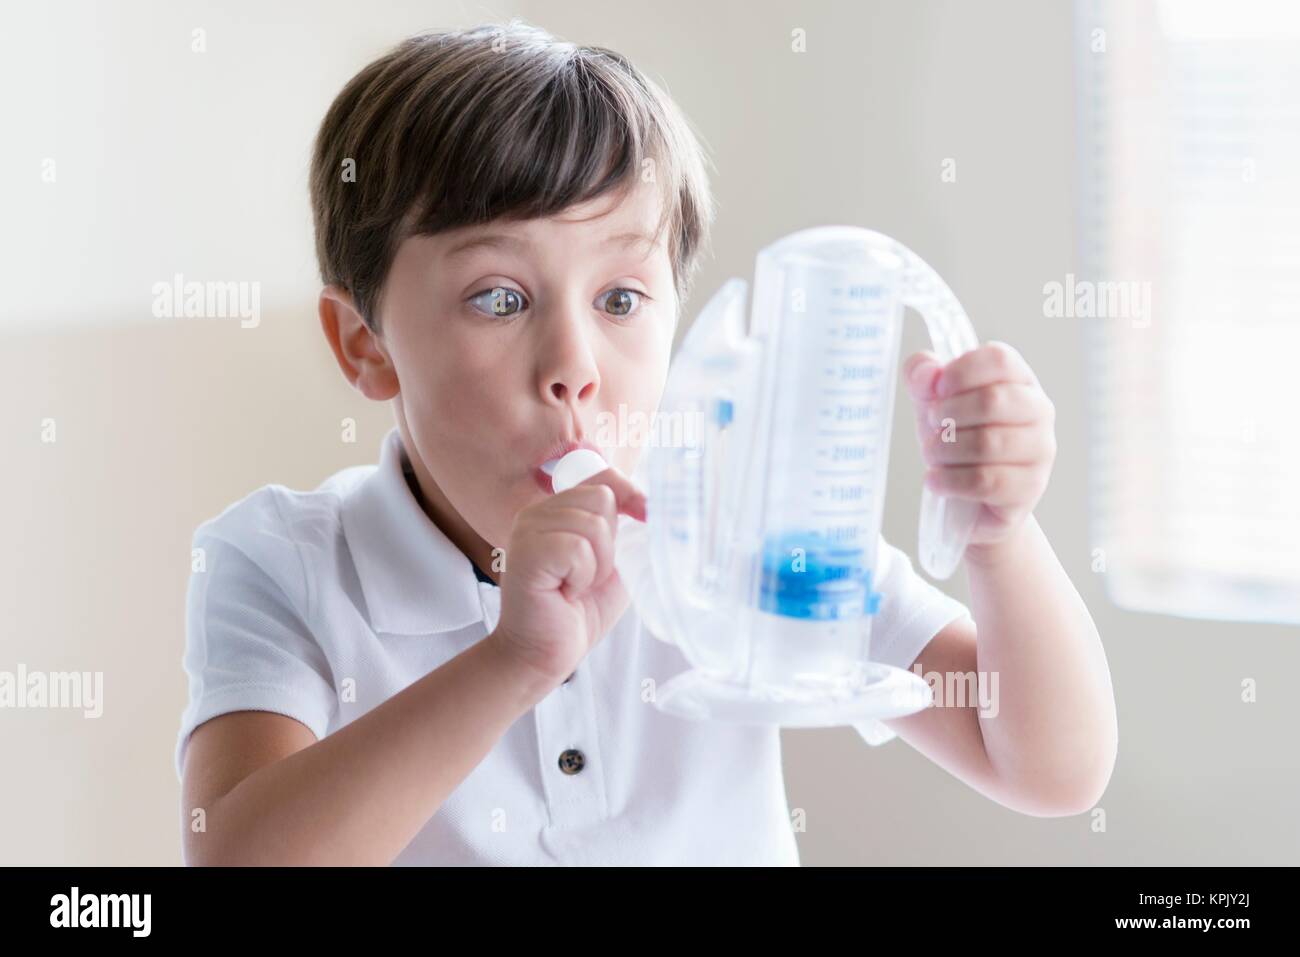 Young boy using breathing equipment. Stock Photo